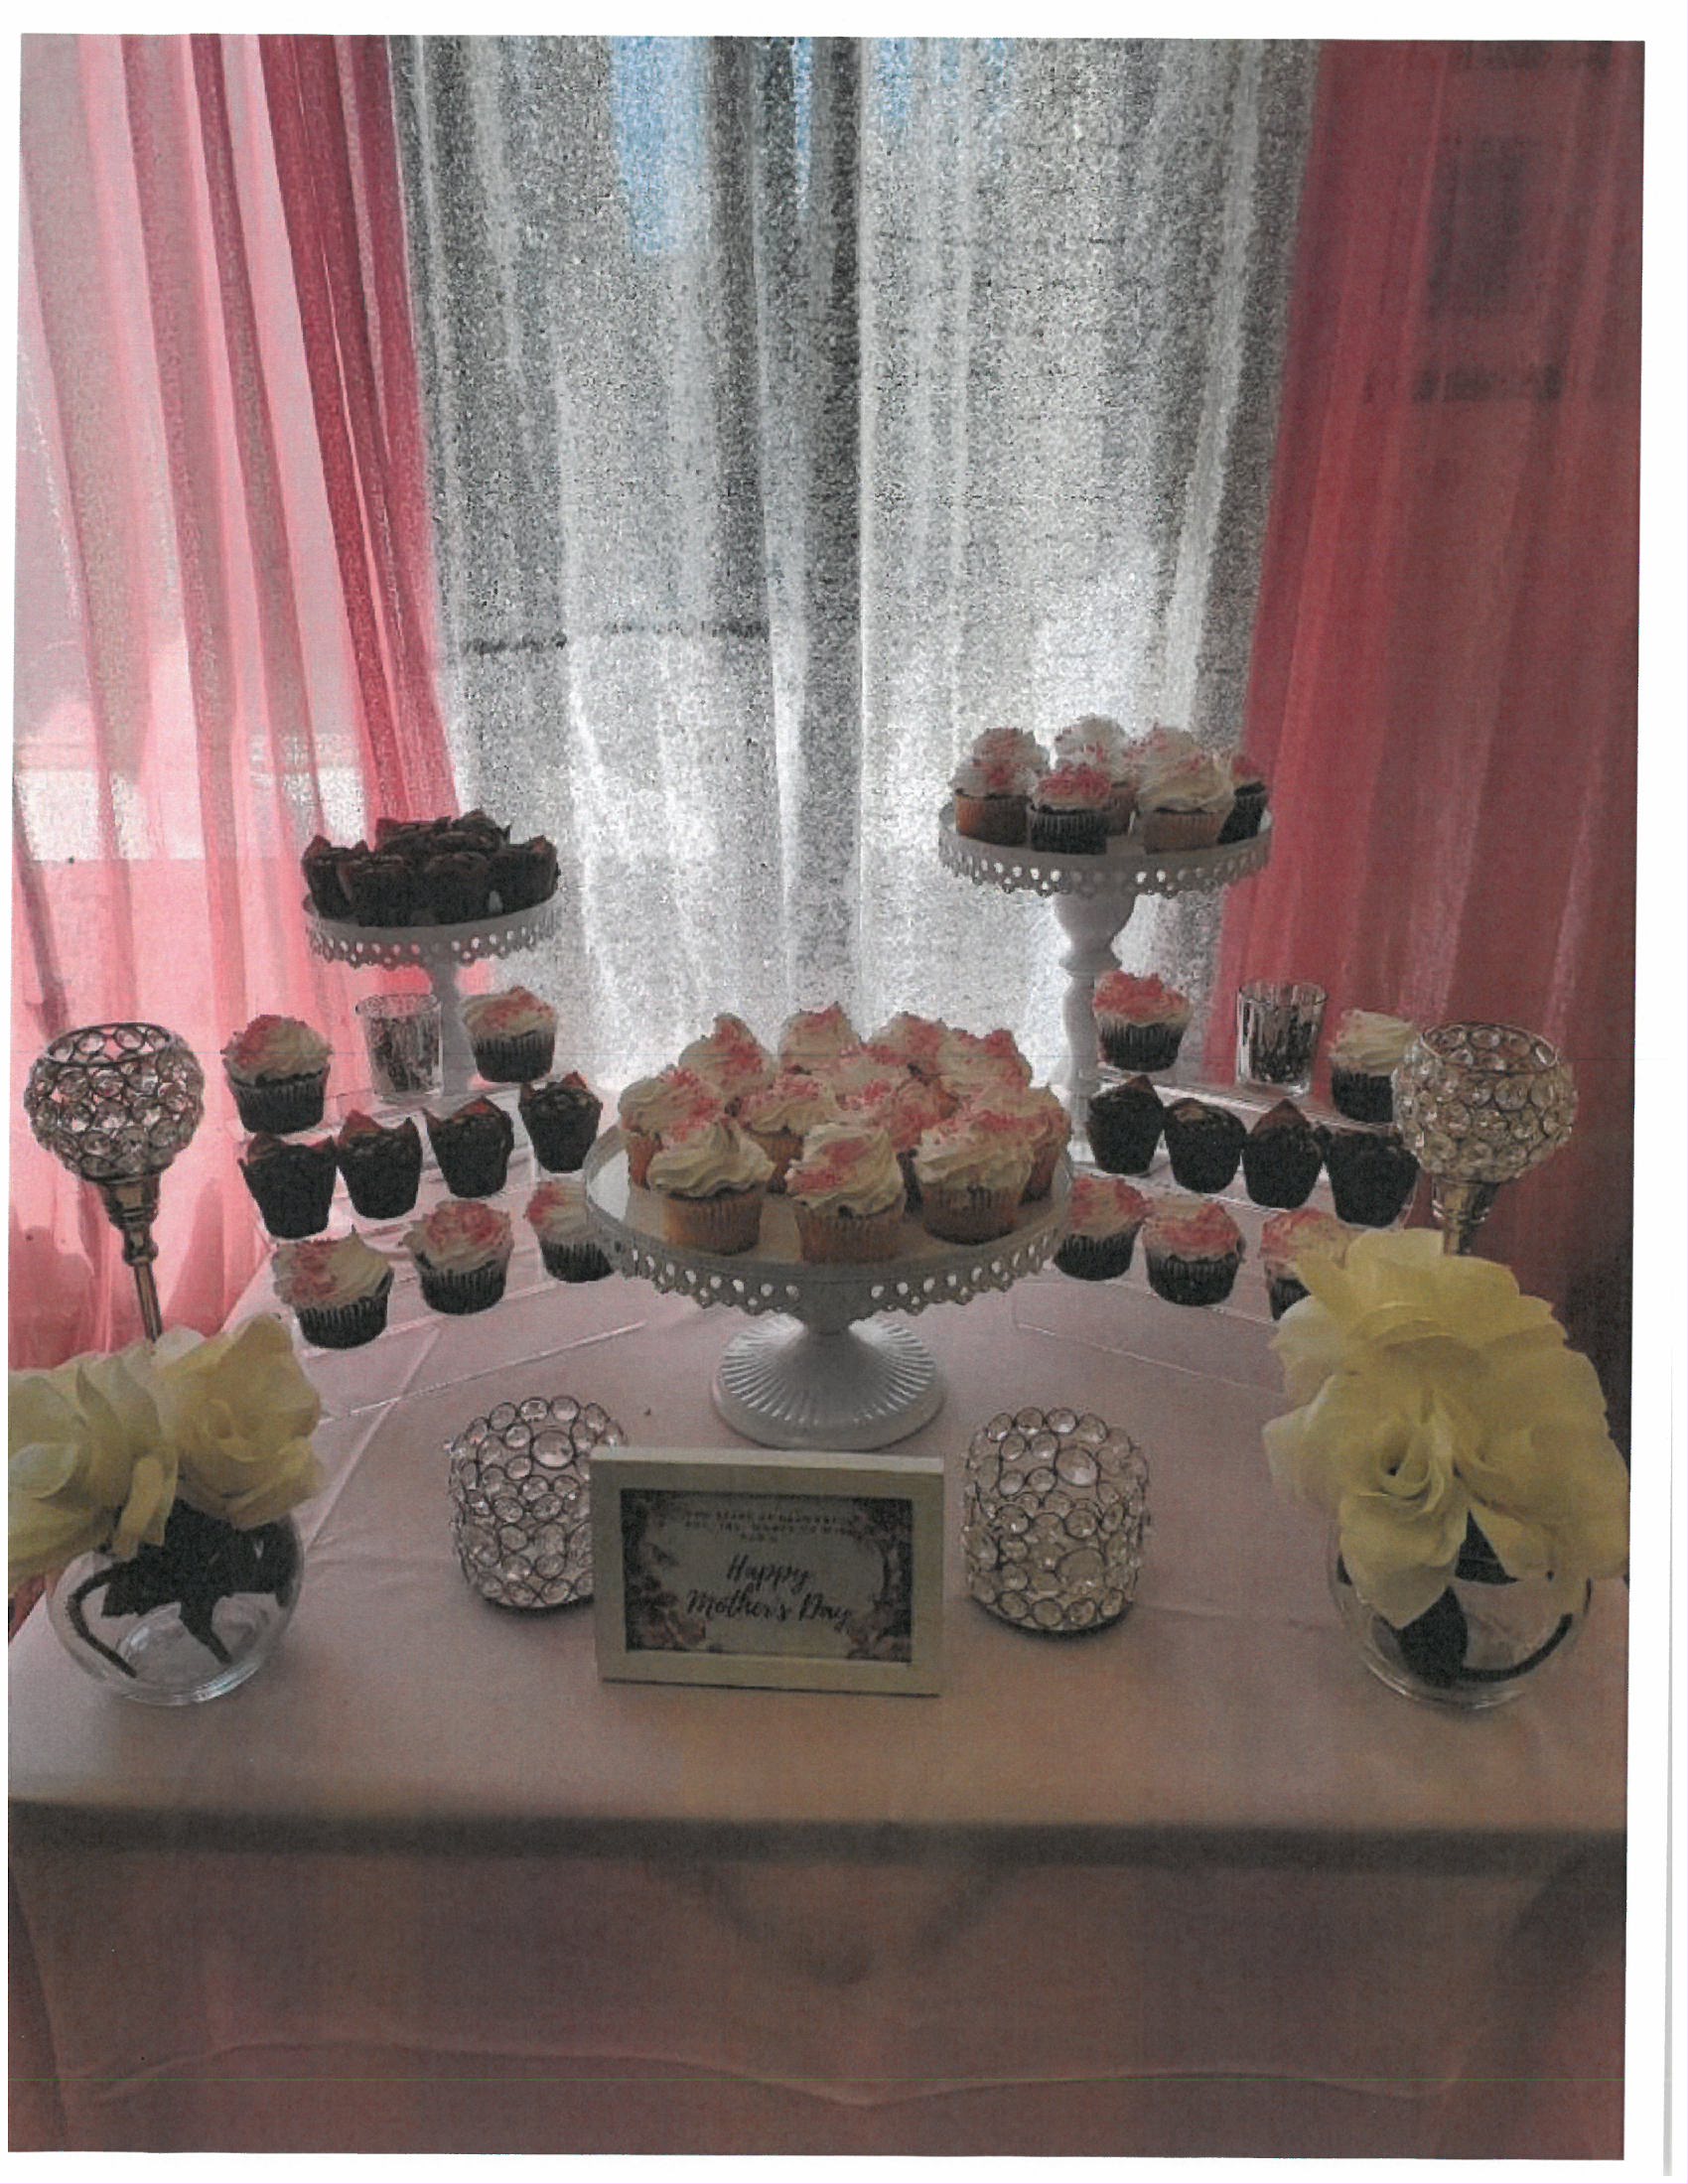 A dessert table set up for Mothers Day